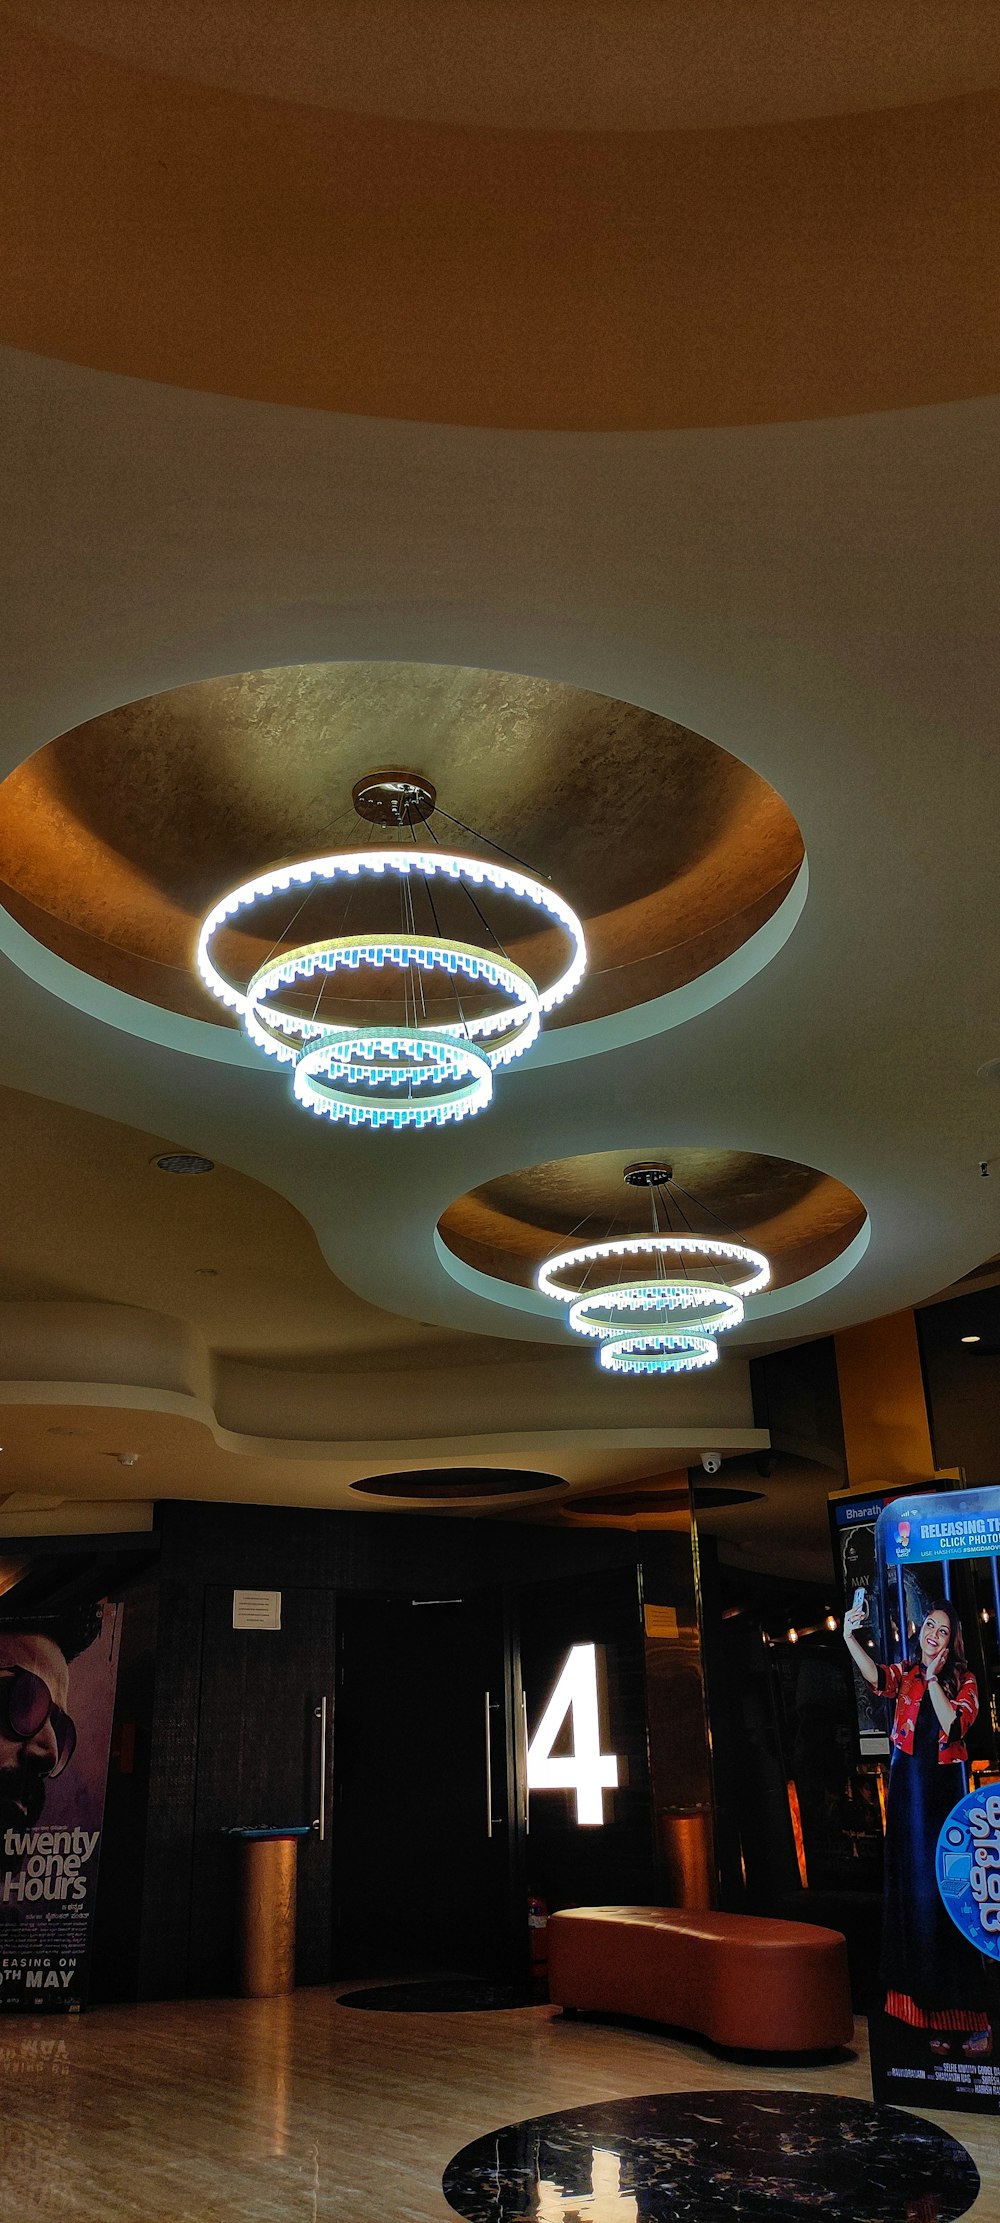 a ceiling fan with lights